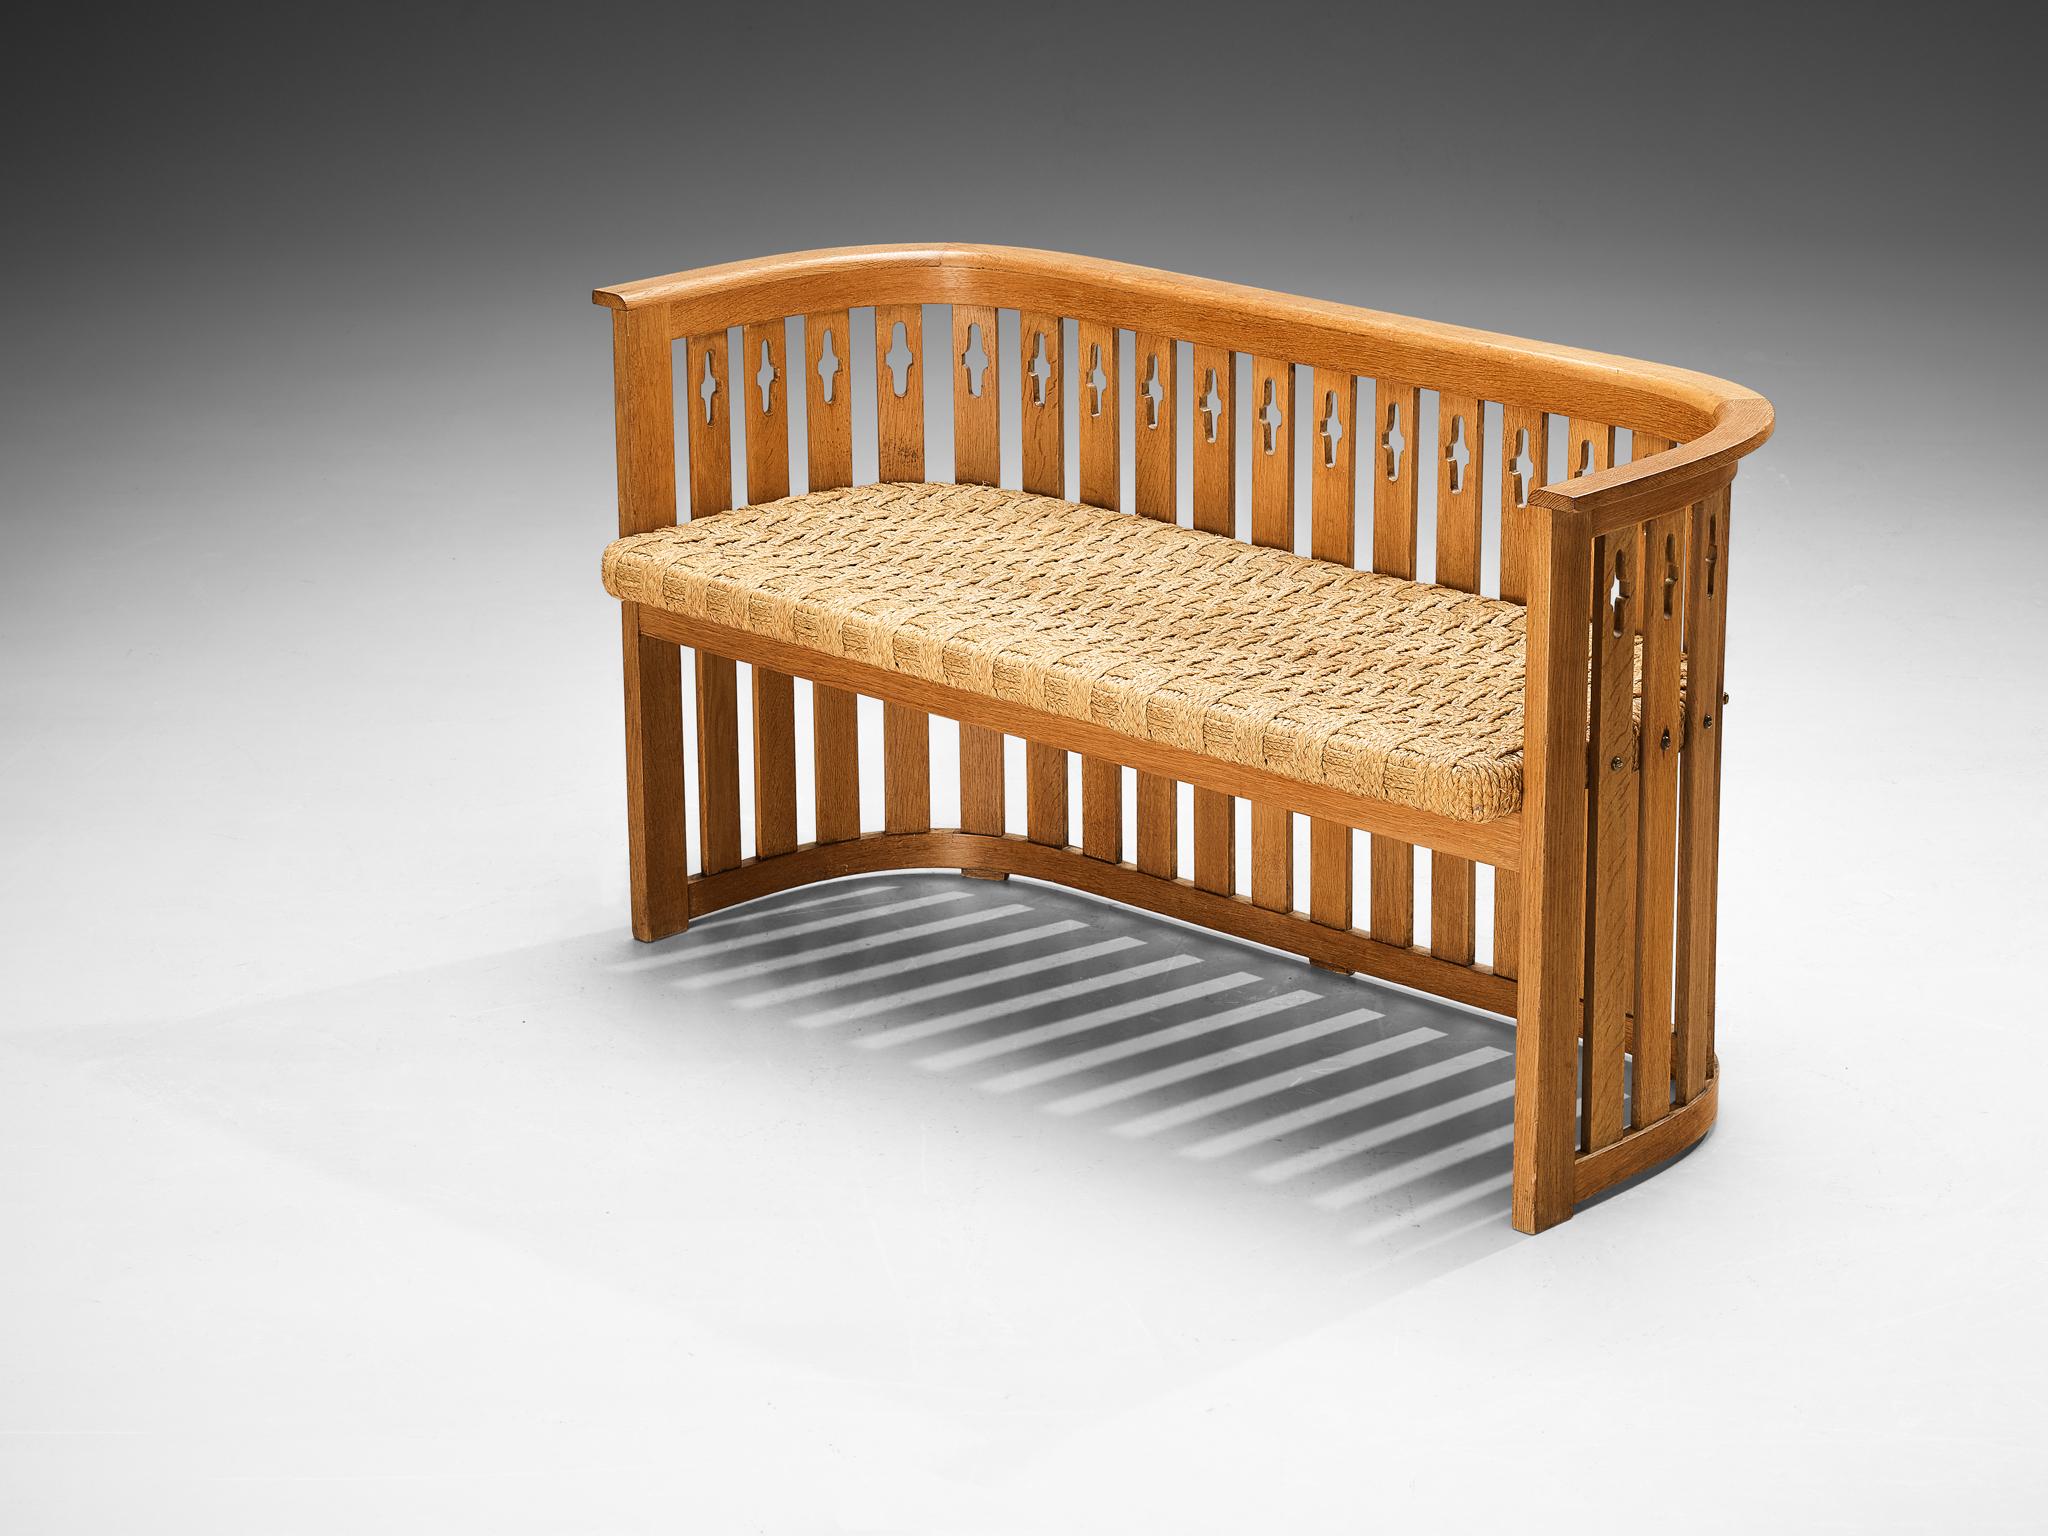 Bench, oak, braided straw, Europe, 1920s

This bench is designed during the Arts & Crafts period in Europe approximately around the twenties and designed by an experienced craftsman whose identity is unfortunately not yet known. The design resonates